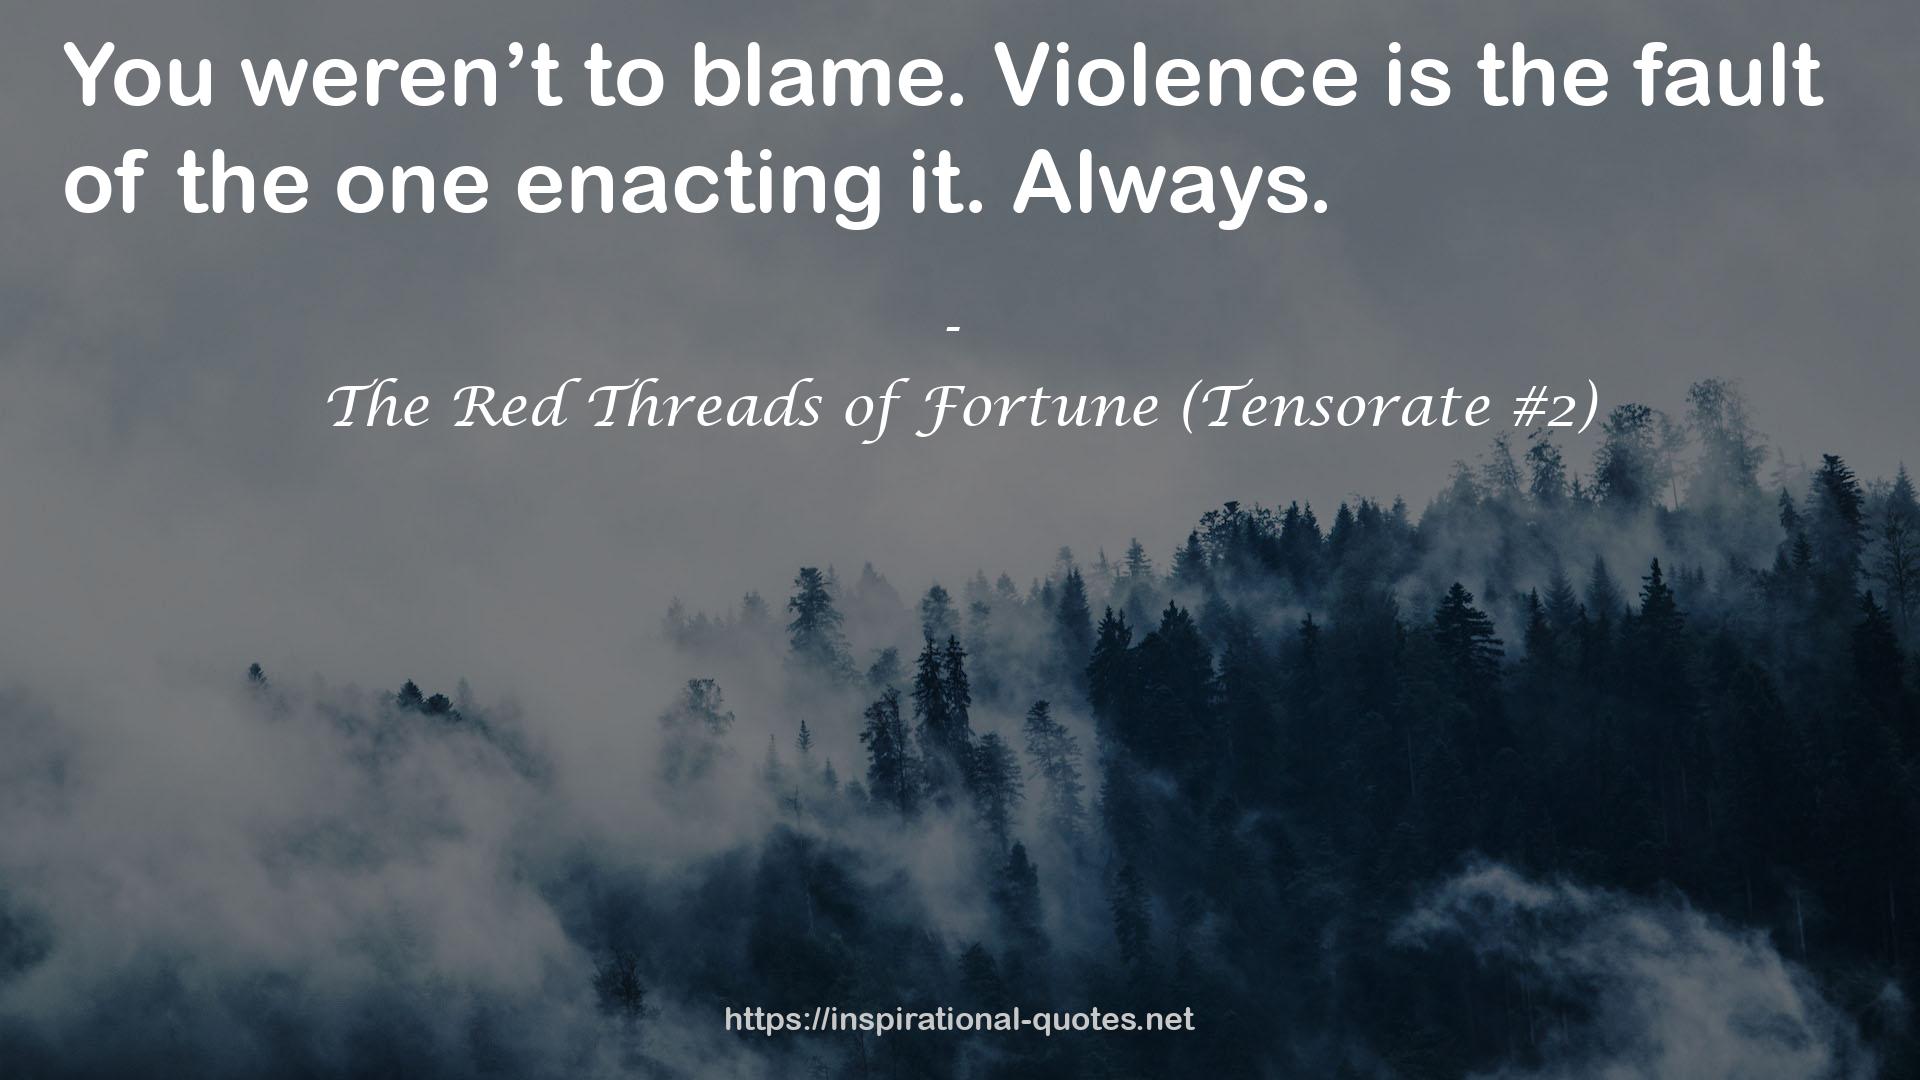 The Red Threads of Fortune (Tensorate #2) QUOTES